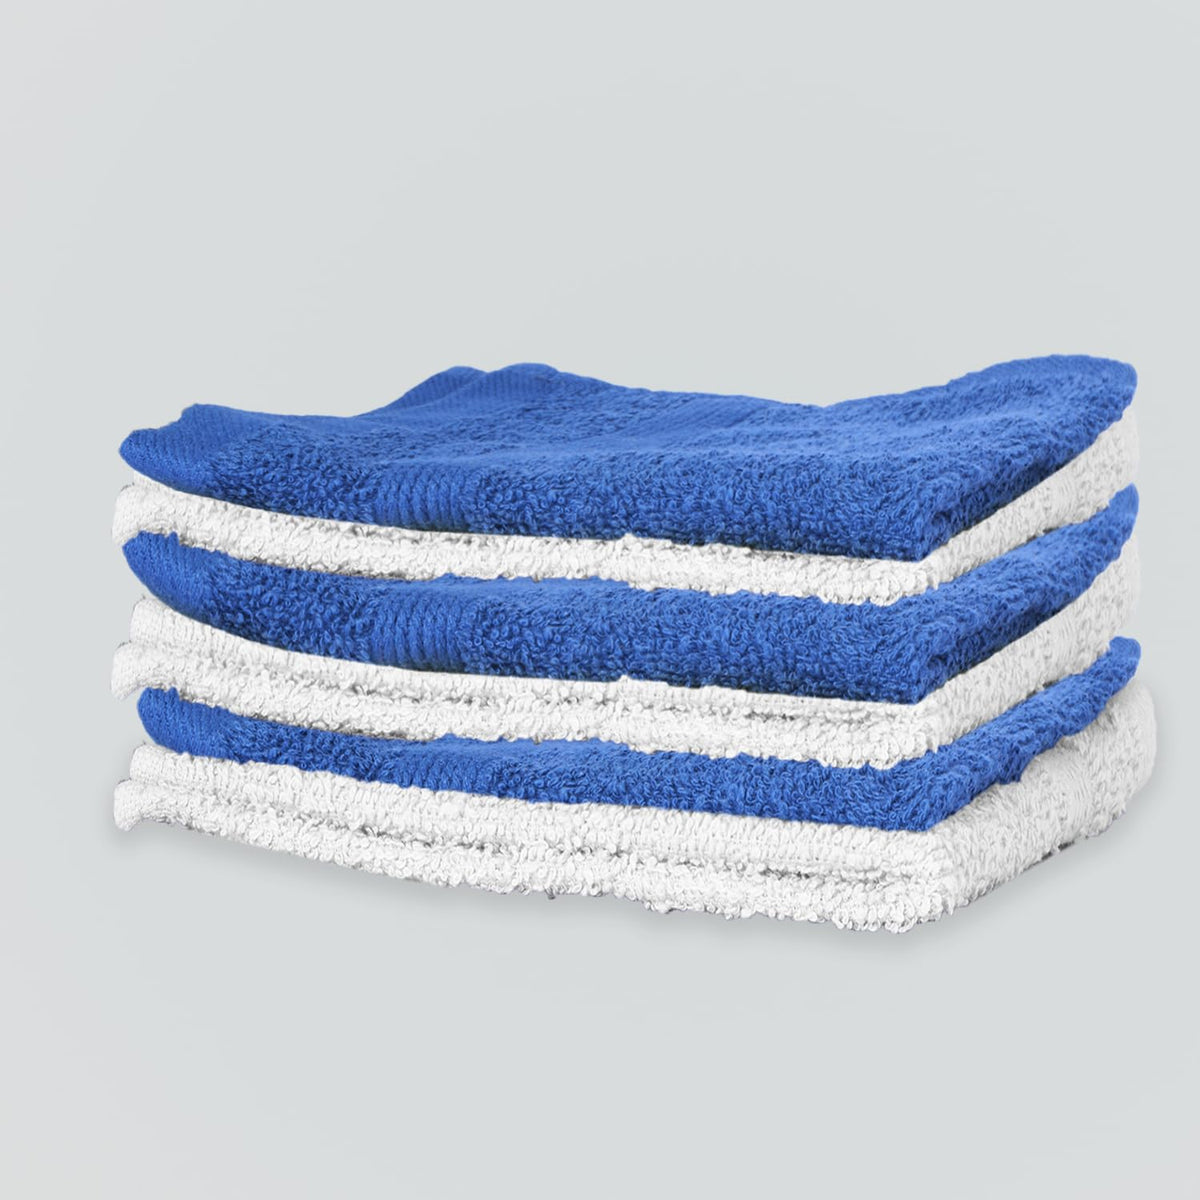 Kuber Industries 525 GSM Cotton Hand Towels |Super Soft, Quick Absorbent & Anti-Bacterial|Gym & Workout Towels|Pack of 6 (Blue & Ivory)